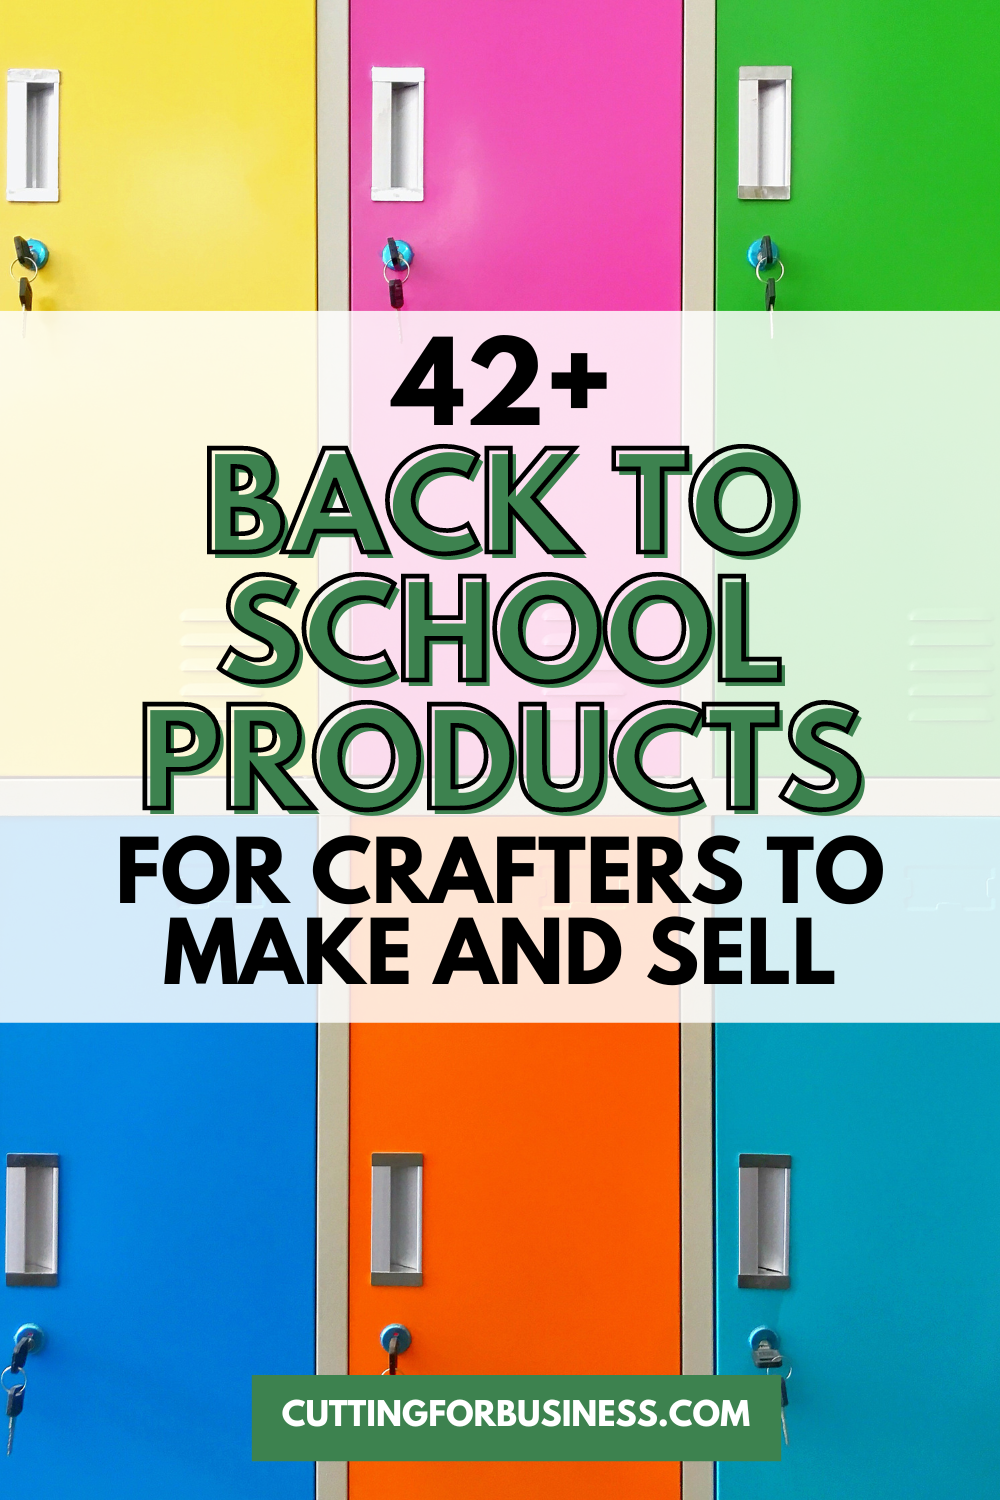 42+ Back to School Products for Crafters to Make and Sell - cuttingforbusiness.com